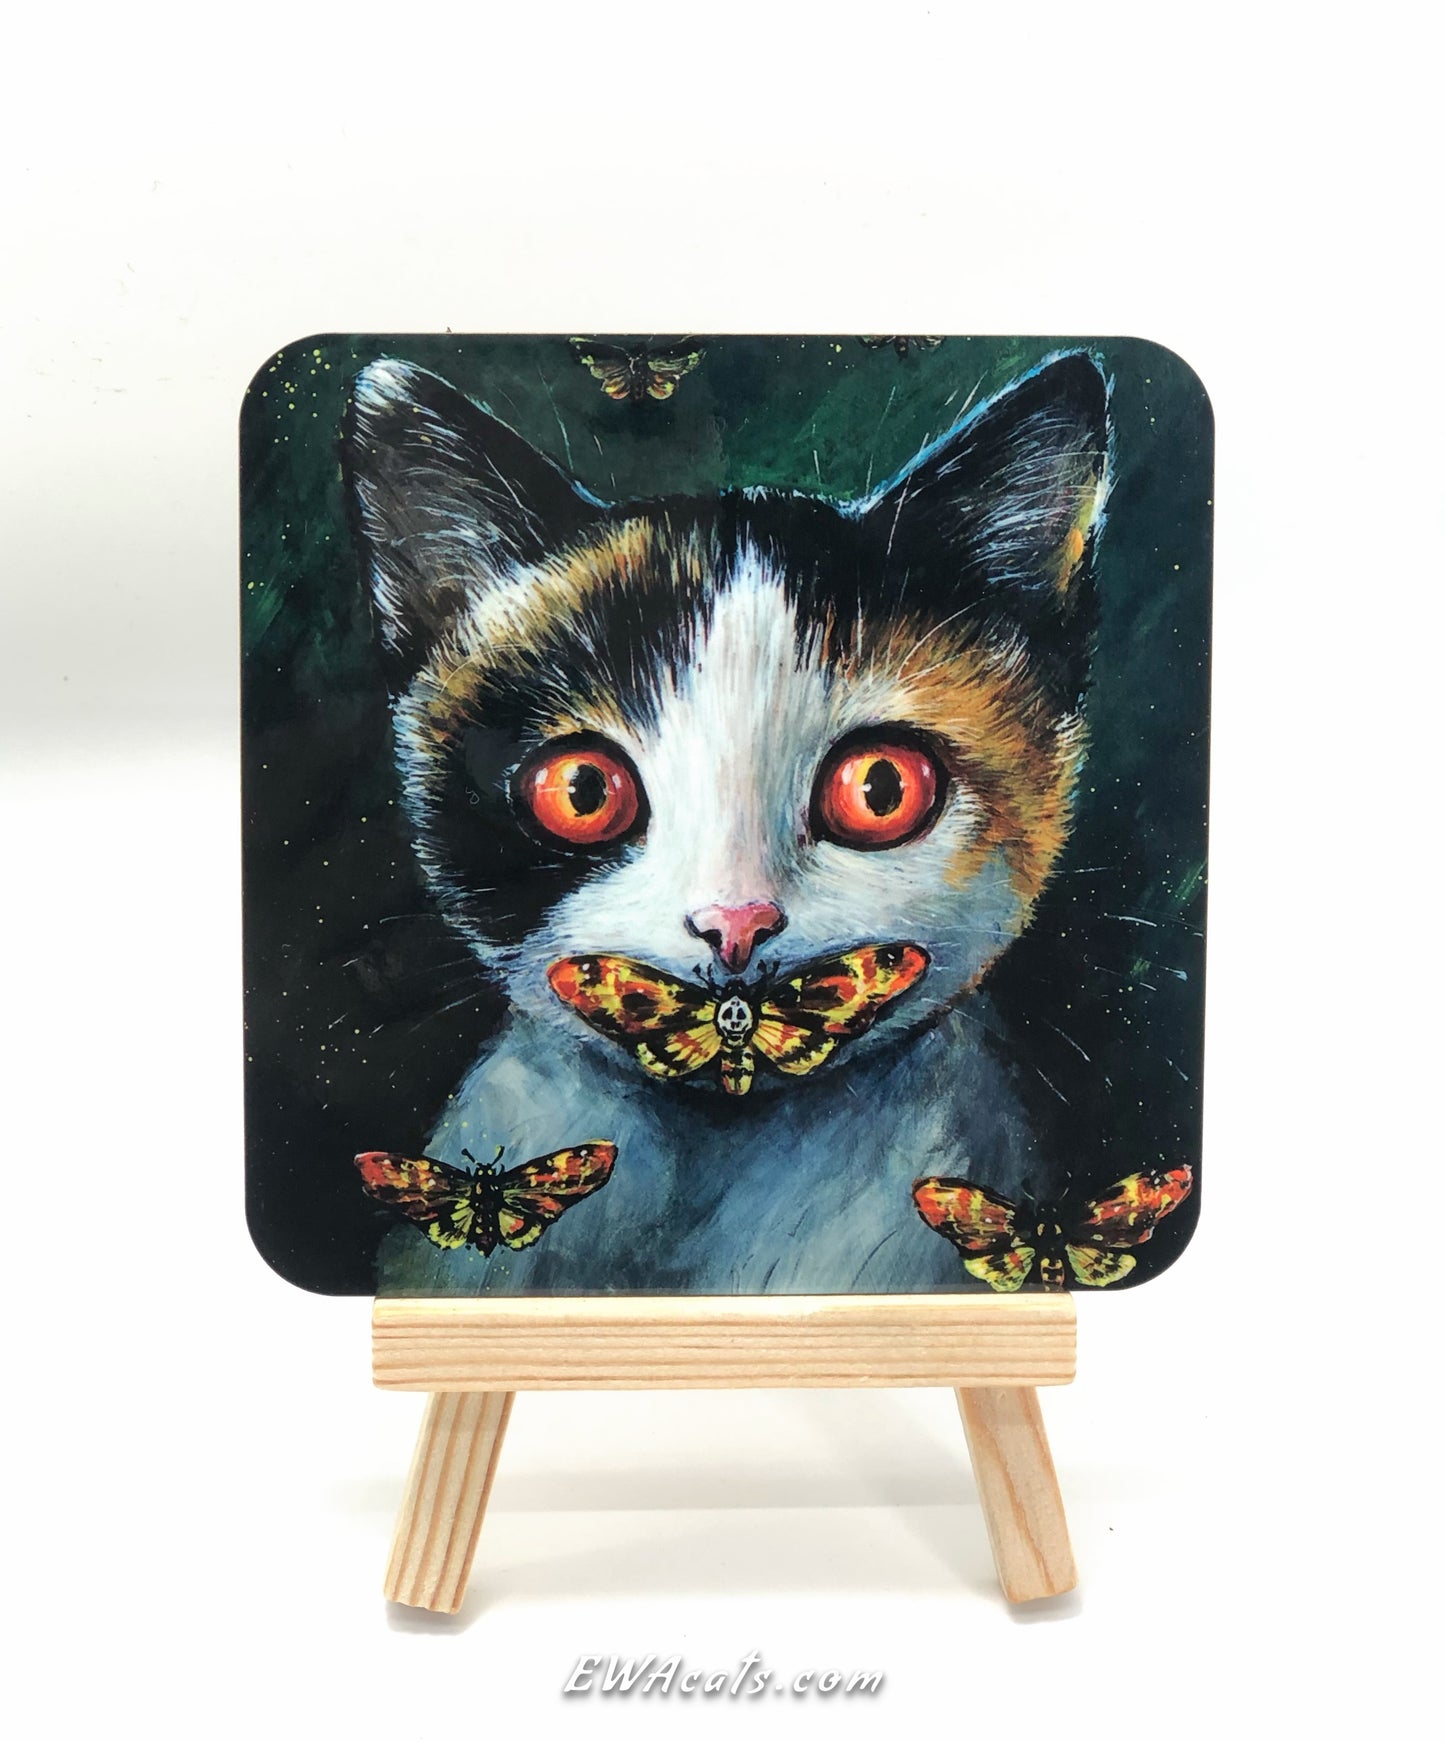 Coaster "Silence of the Cats"